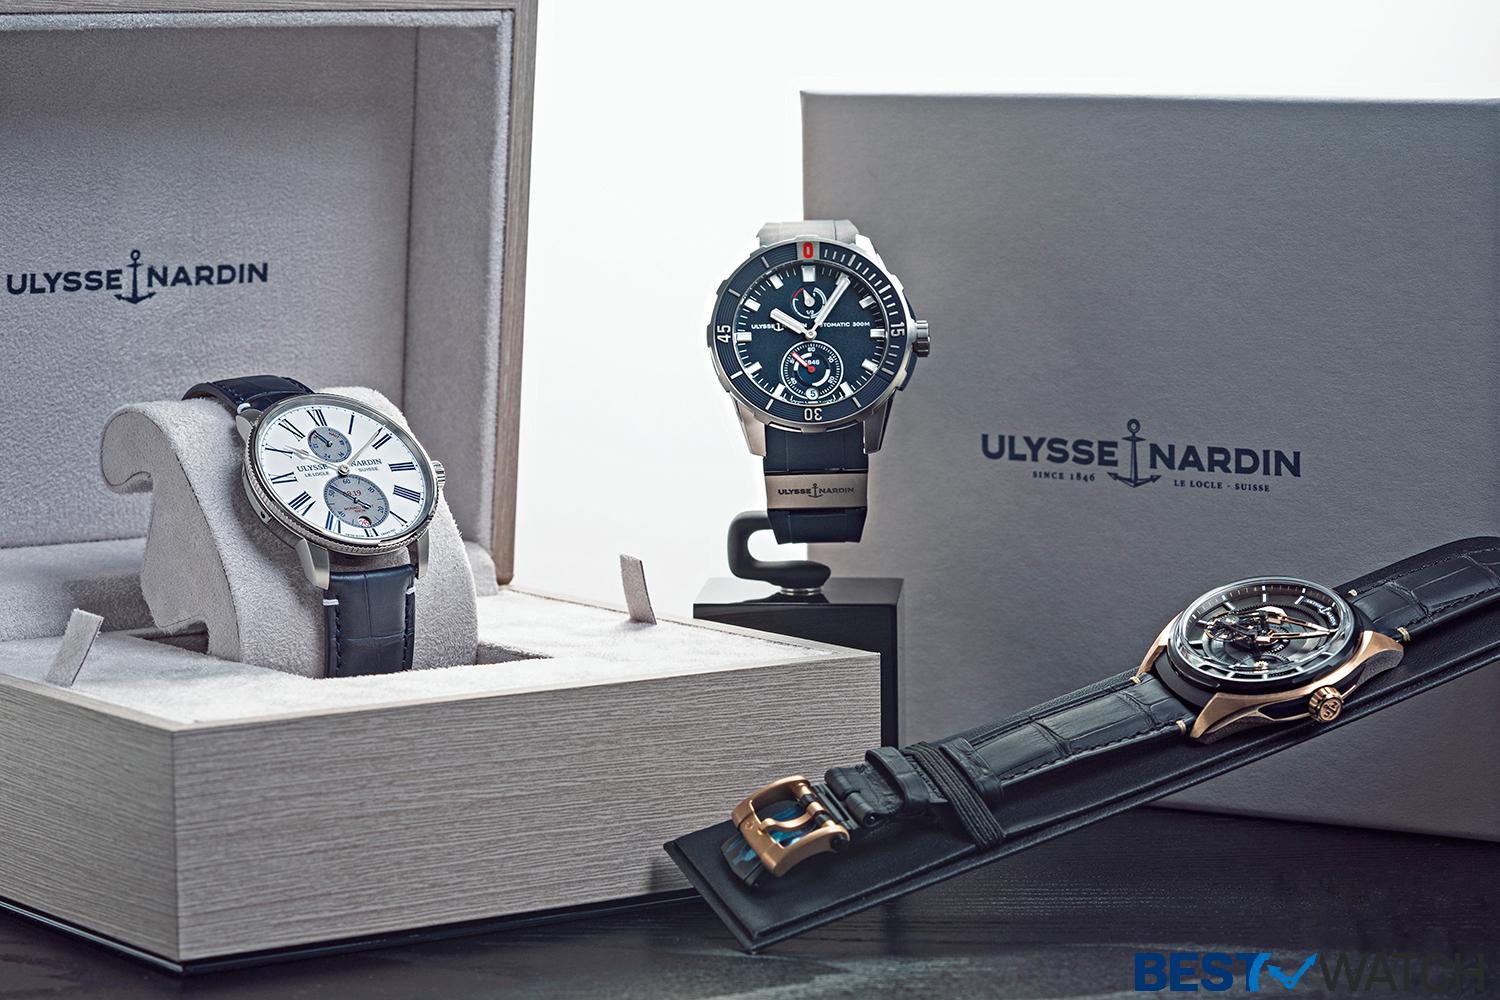 5 Reasons Why You Should Own an Ulysse Nardin Watch